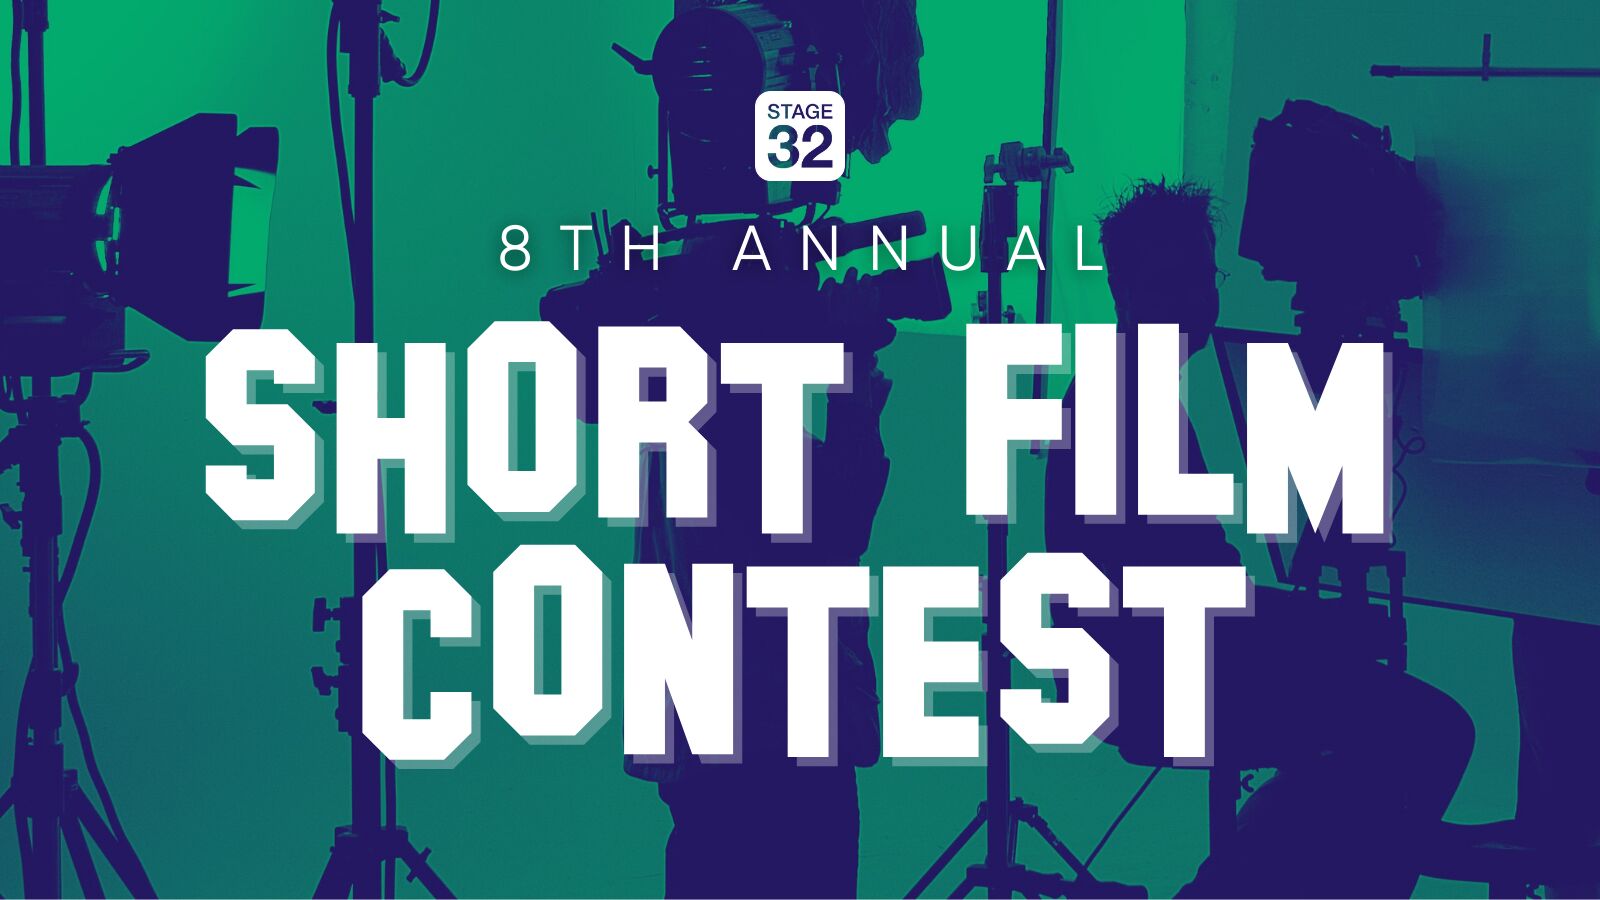 8th Annual Stage 32 Short Film Contest